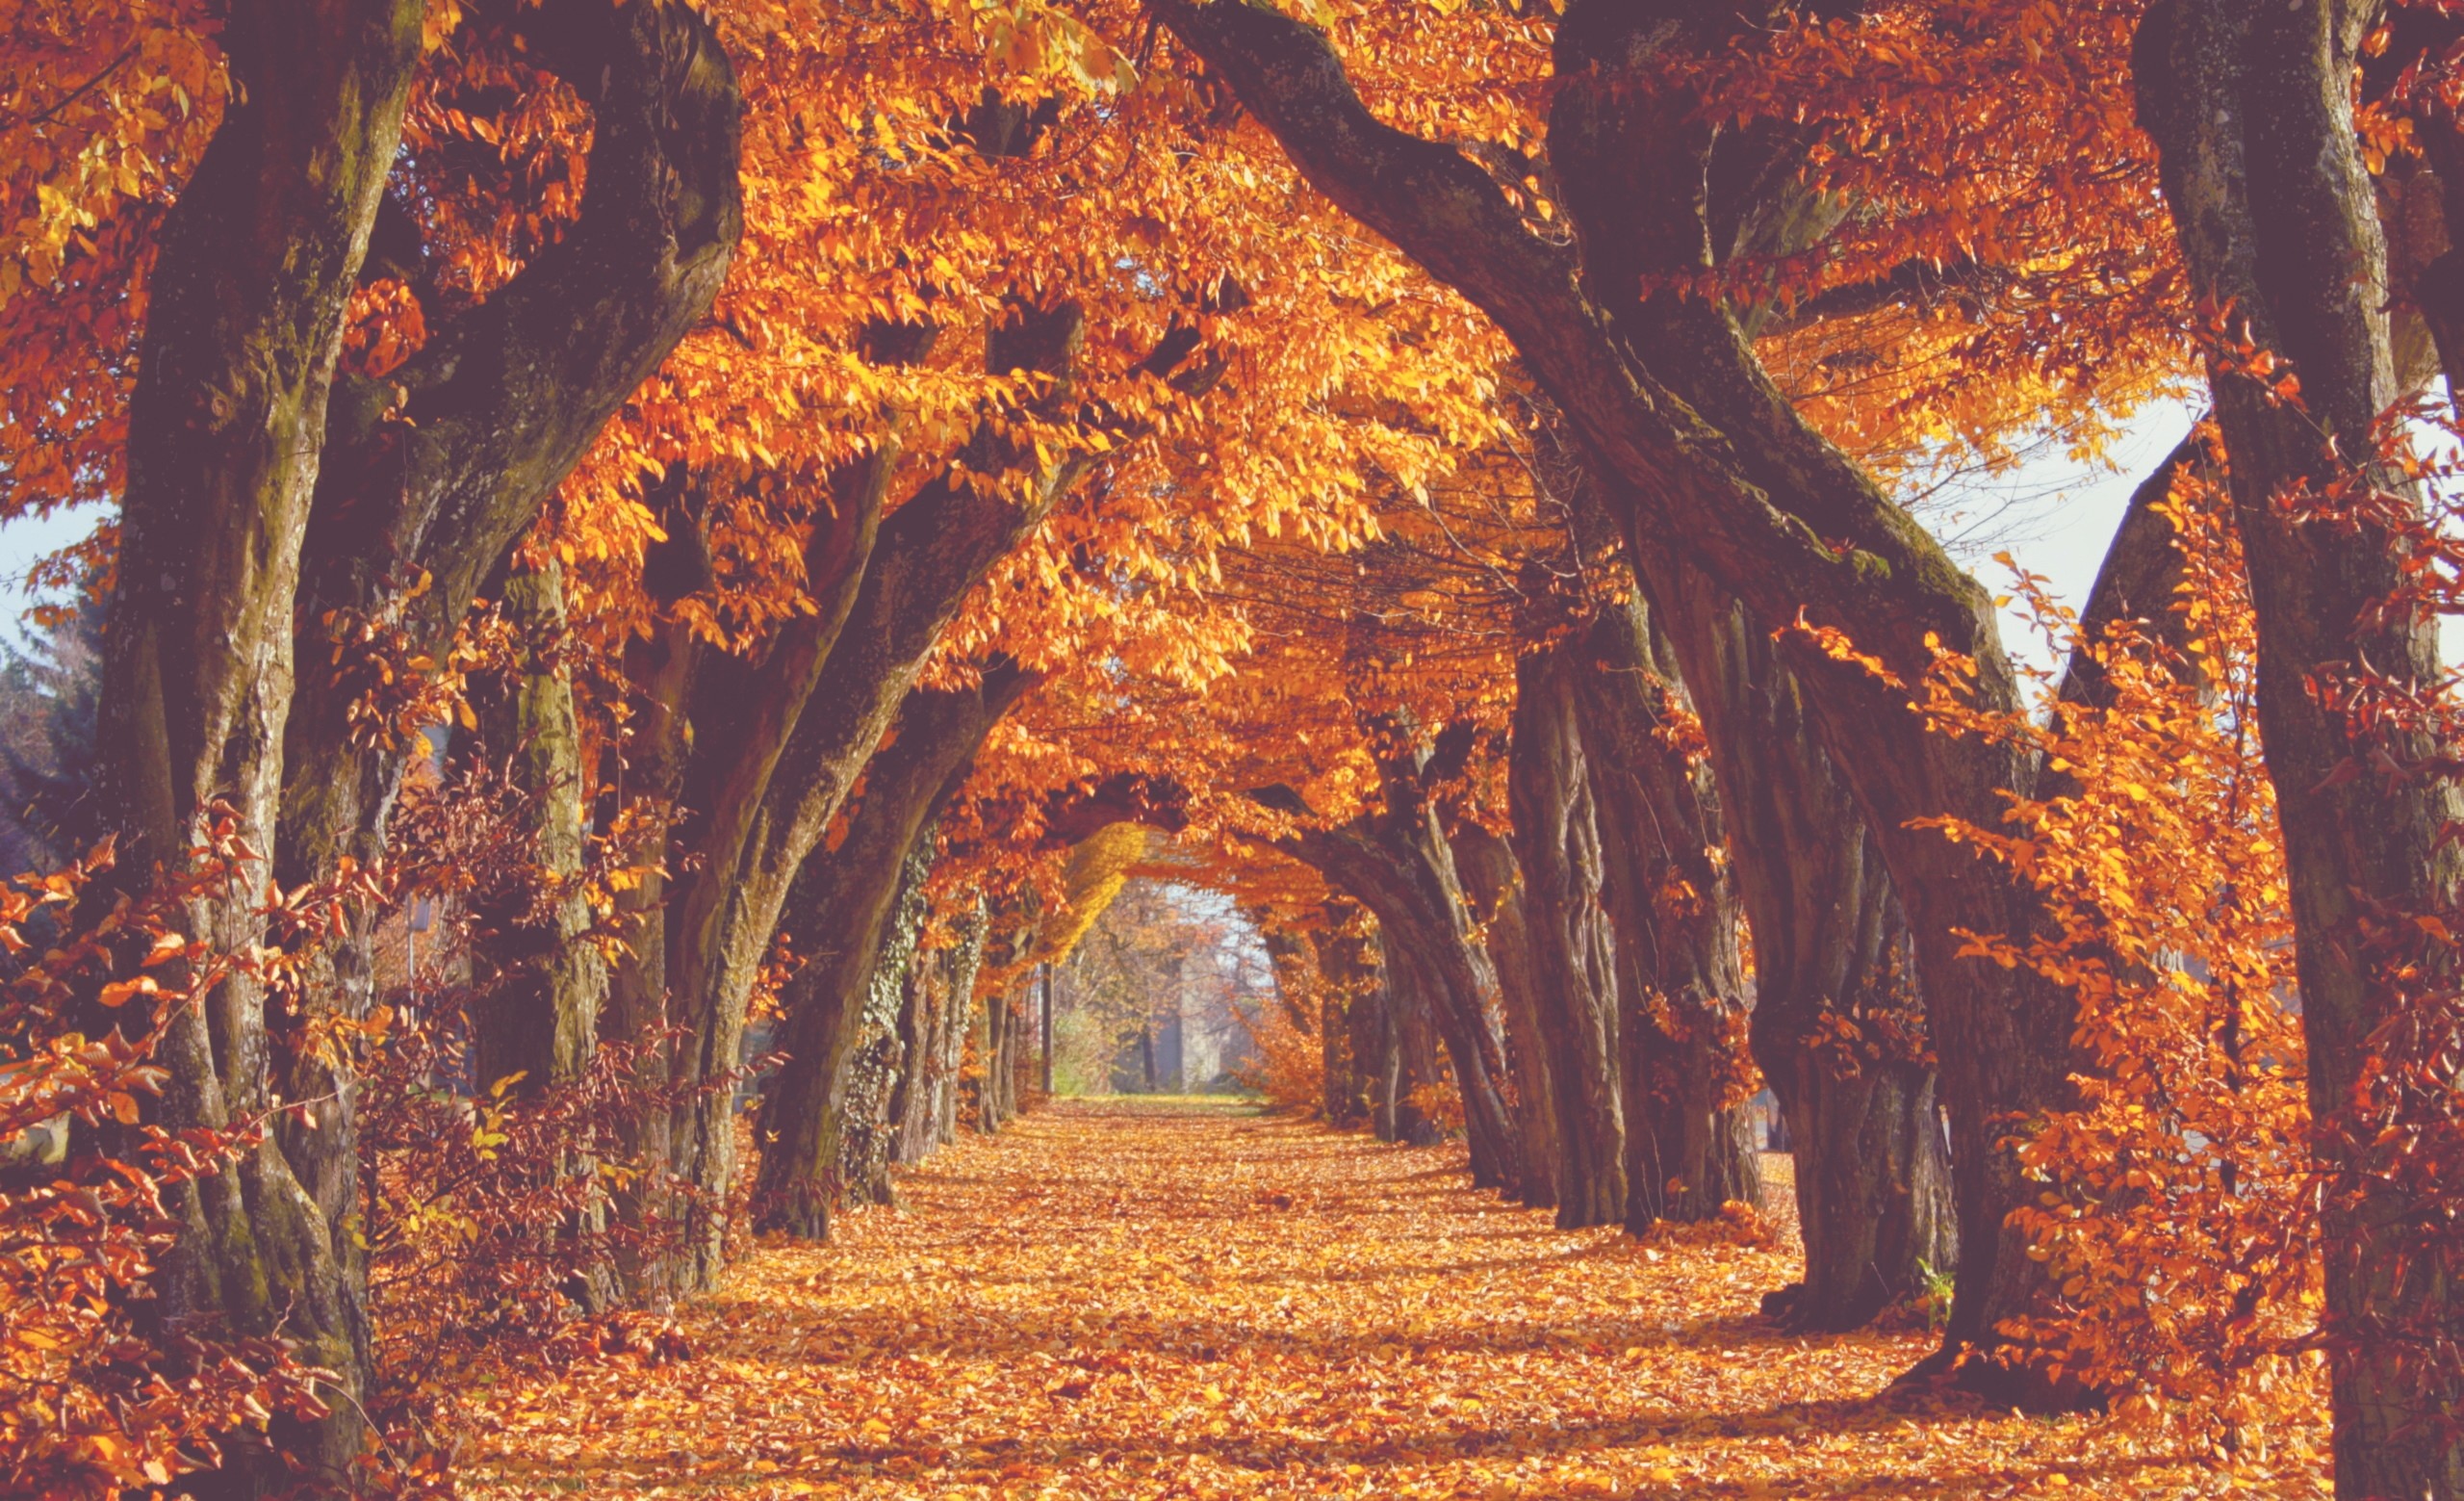 2560x1559 Image result for autumn background tumblr